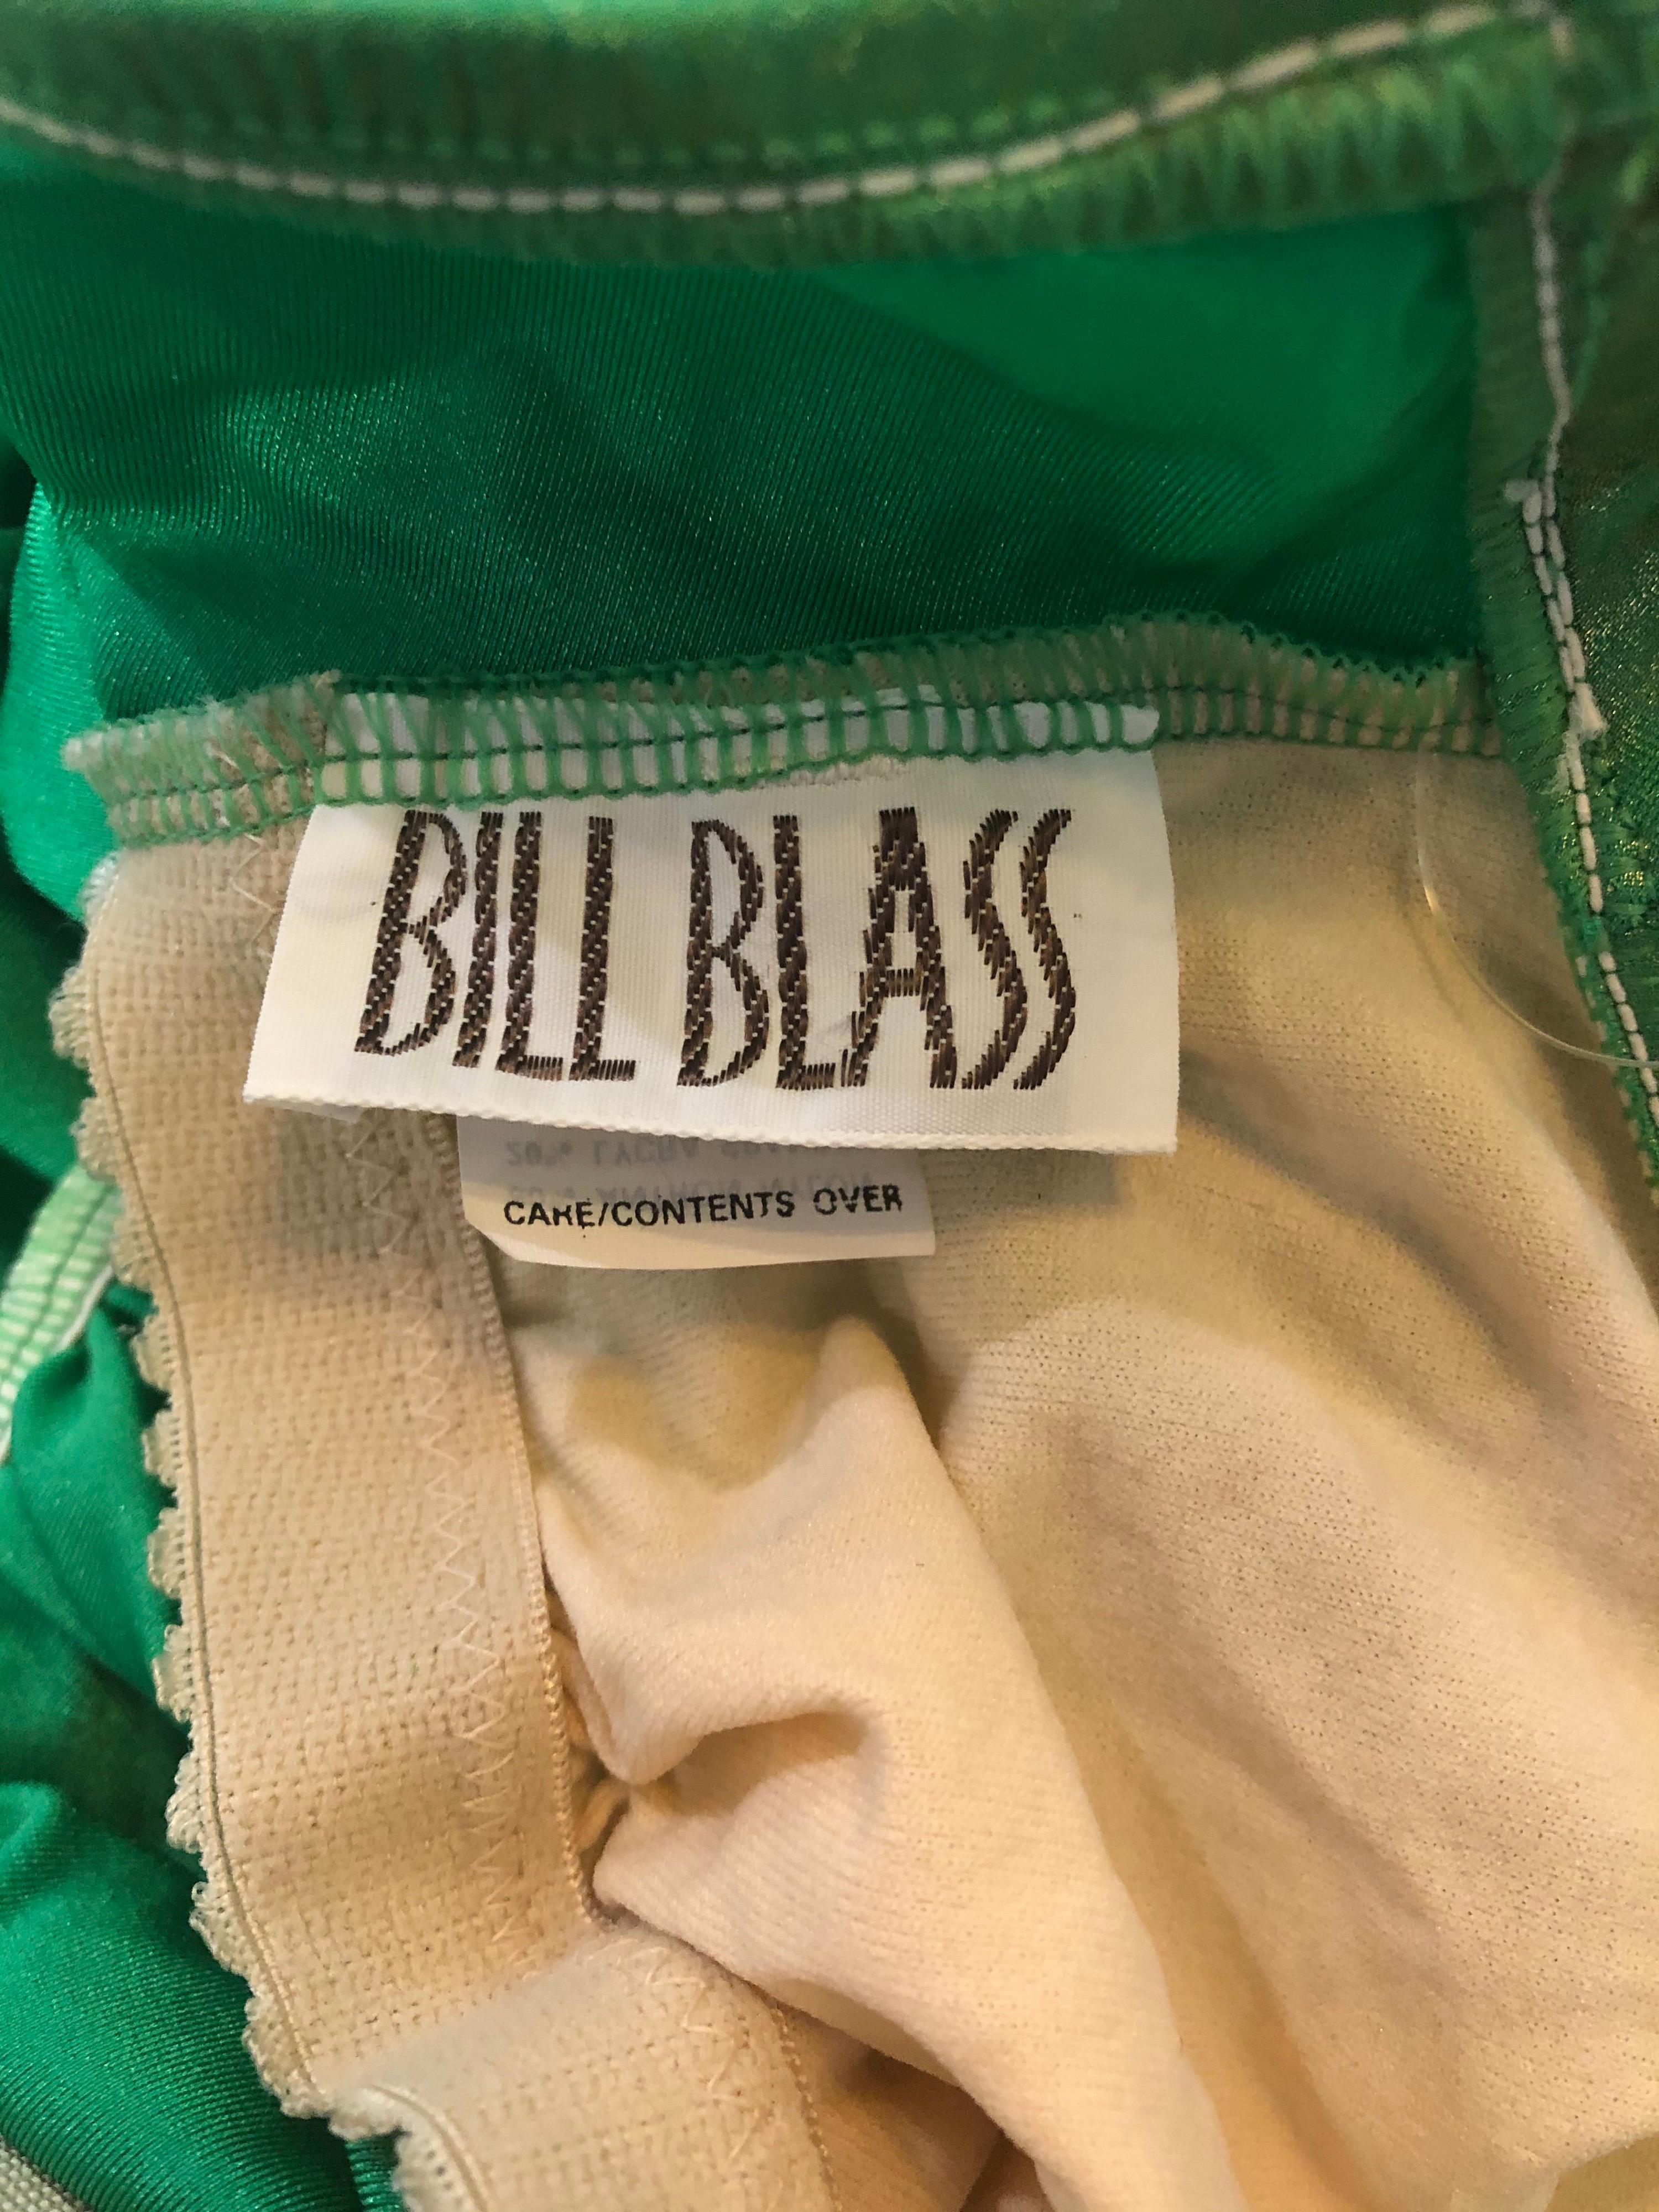 The perfect t early 80s BILL BLASS neon green metallic ruched one piece swimsuit or bodysuit ! Features flattering ruching on the front that camouflages any flaws, and a sexy low cut back. Simply slips on and stretches to fit. Built in interior